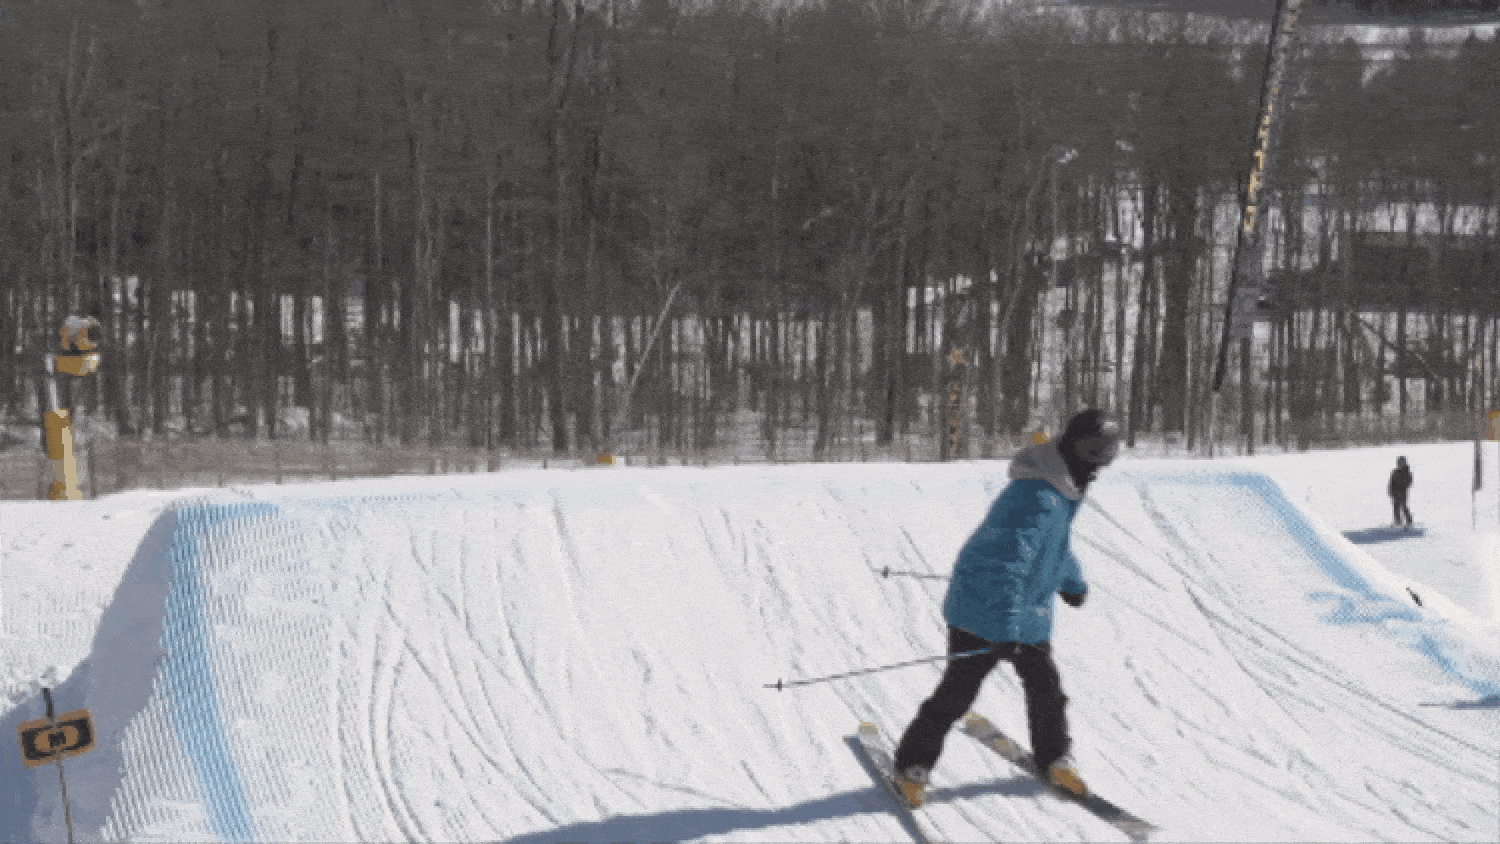 Safety on the Slopes: A Guide for Kids at Winter Camp